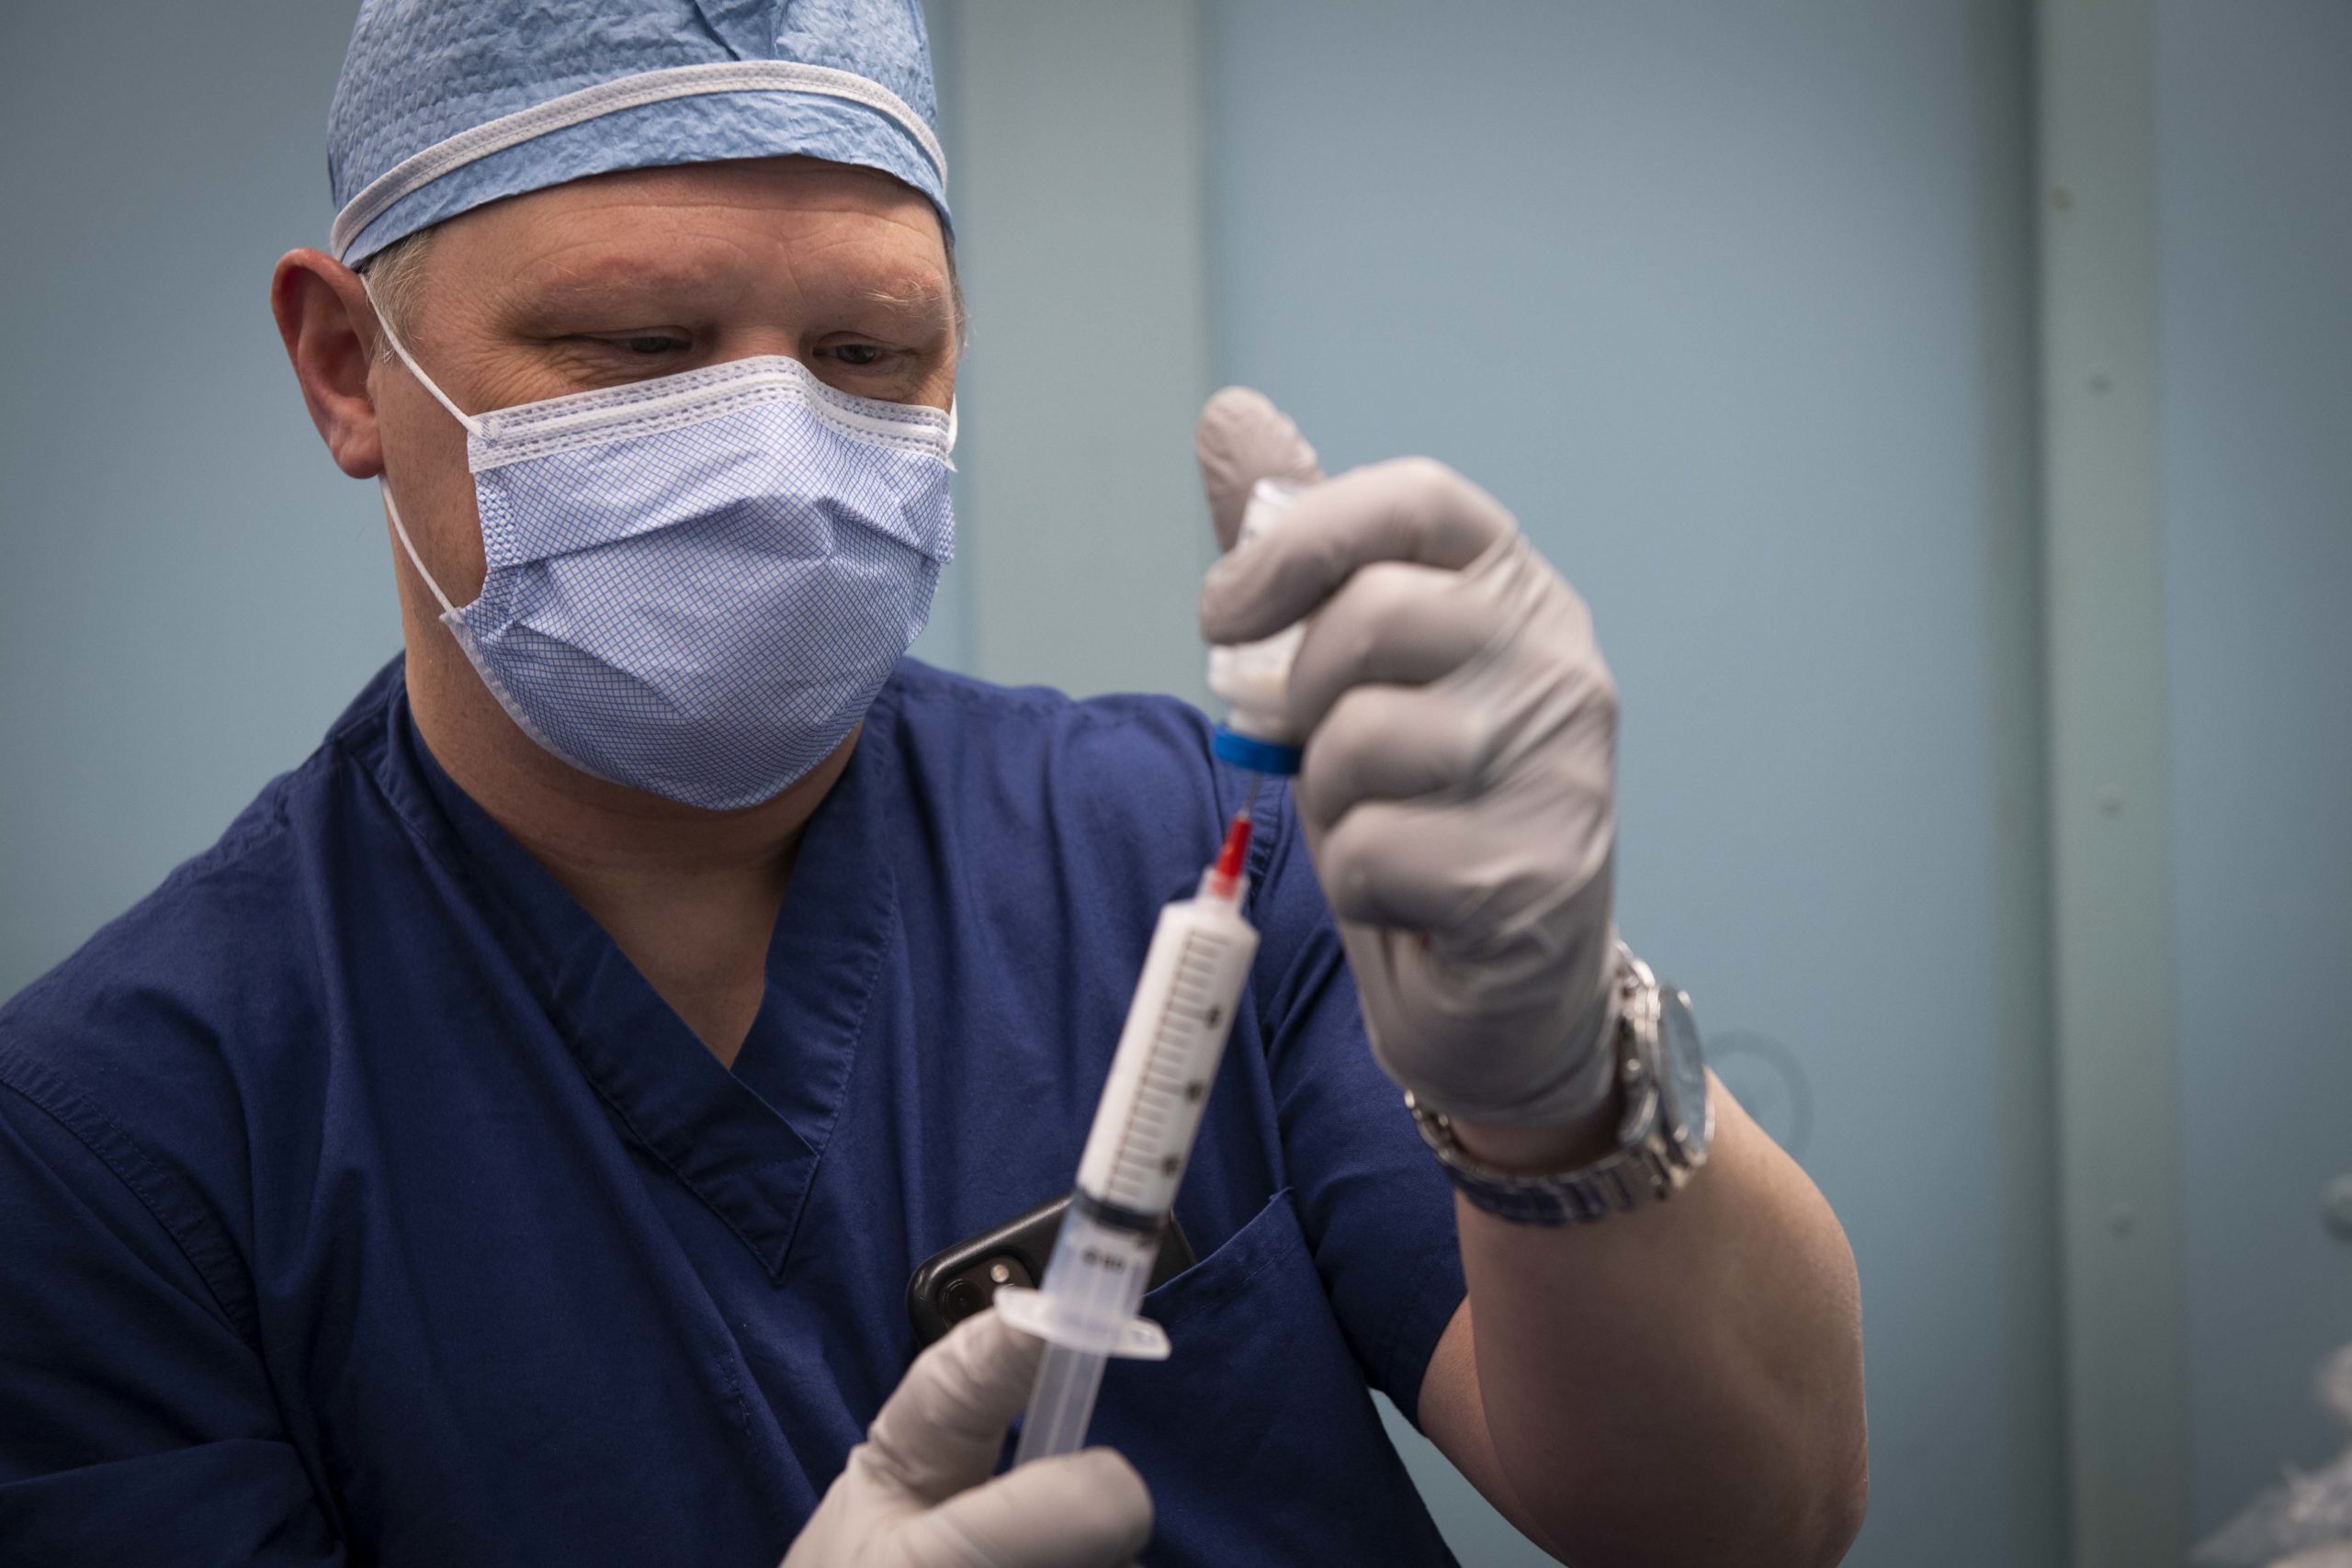 Photo showing man wearing surgical PPE, holding a syringe